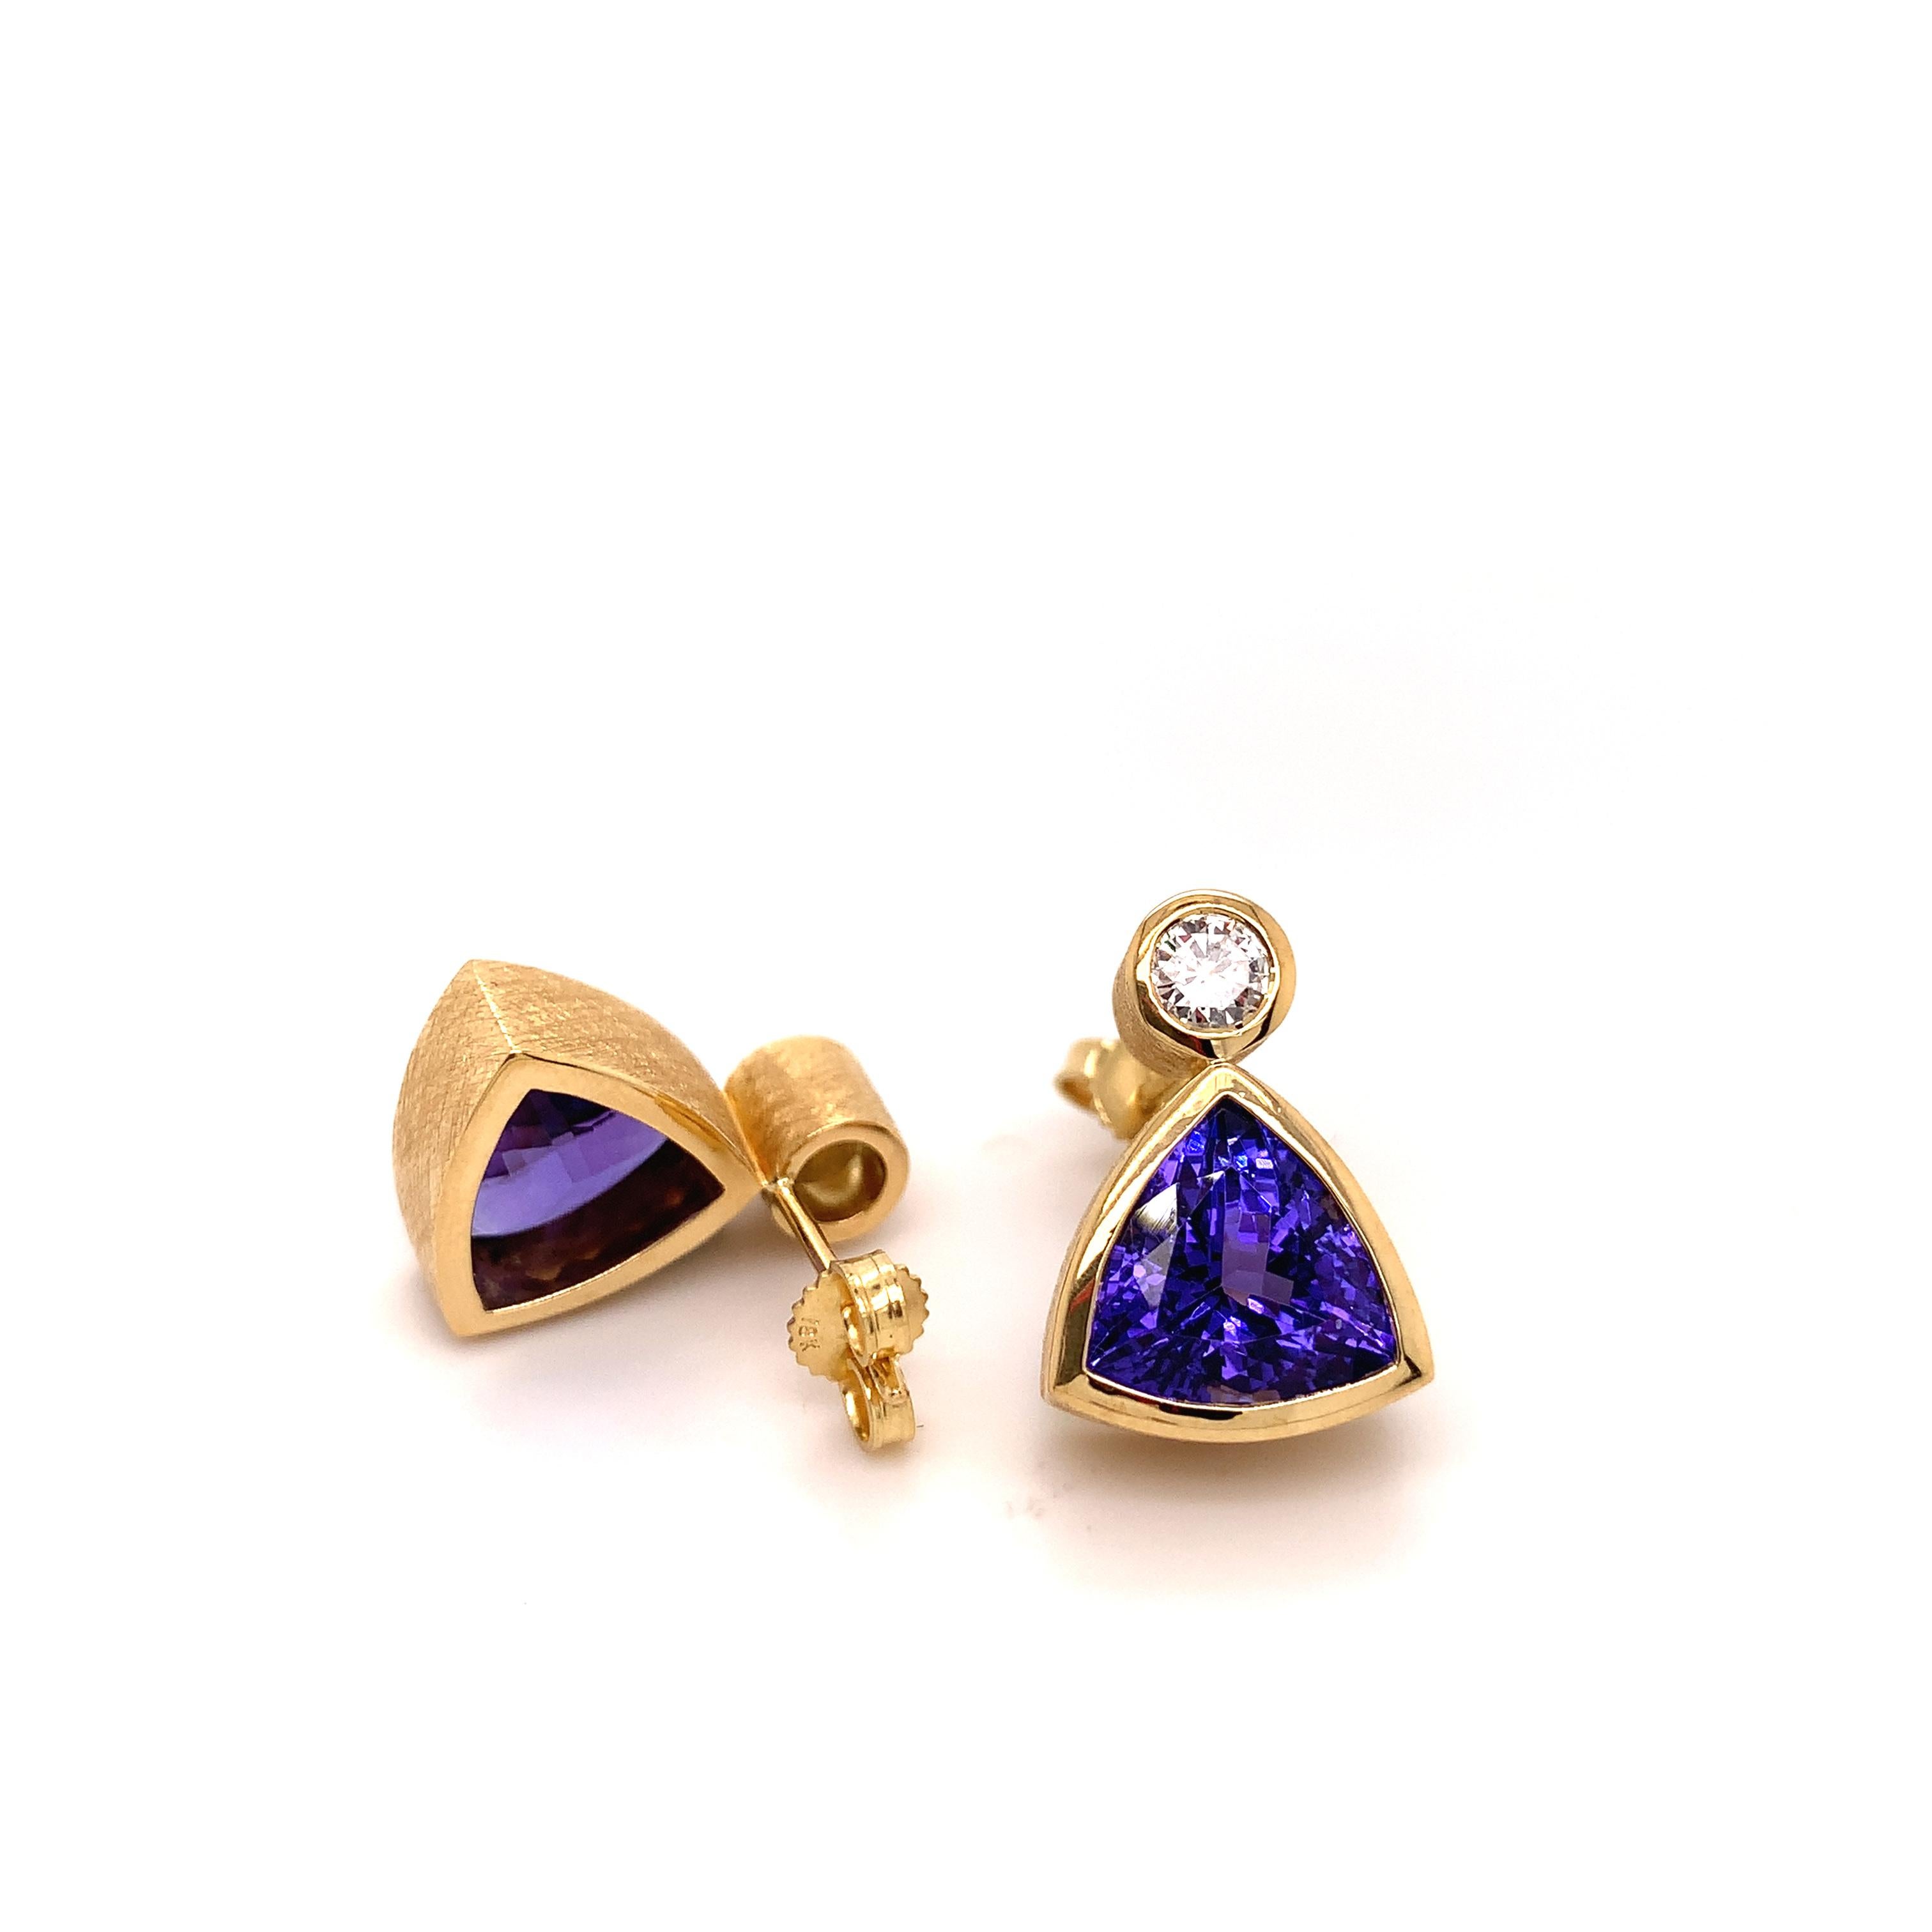 This is one of Elke's favorite designs.  She even used this pair on her business card .

These two trillion cut Tanzanites have a total weight of 7.22 carats and are accompanied by two brilliant cut Diamonds. The pair of diamonds are VS grade and G